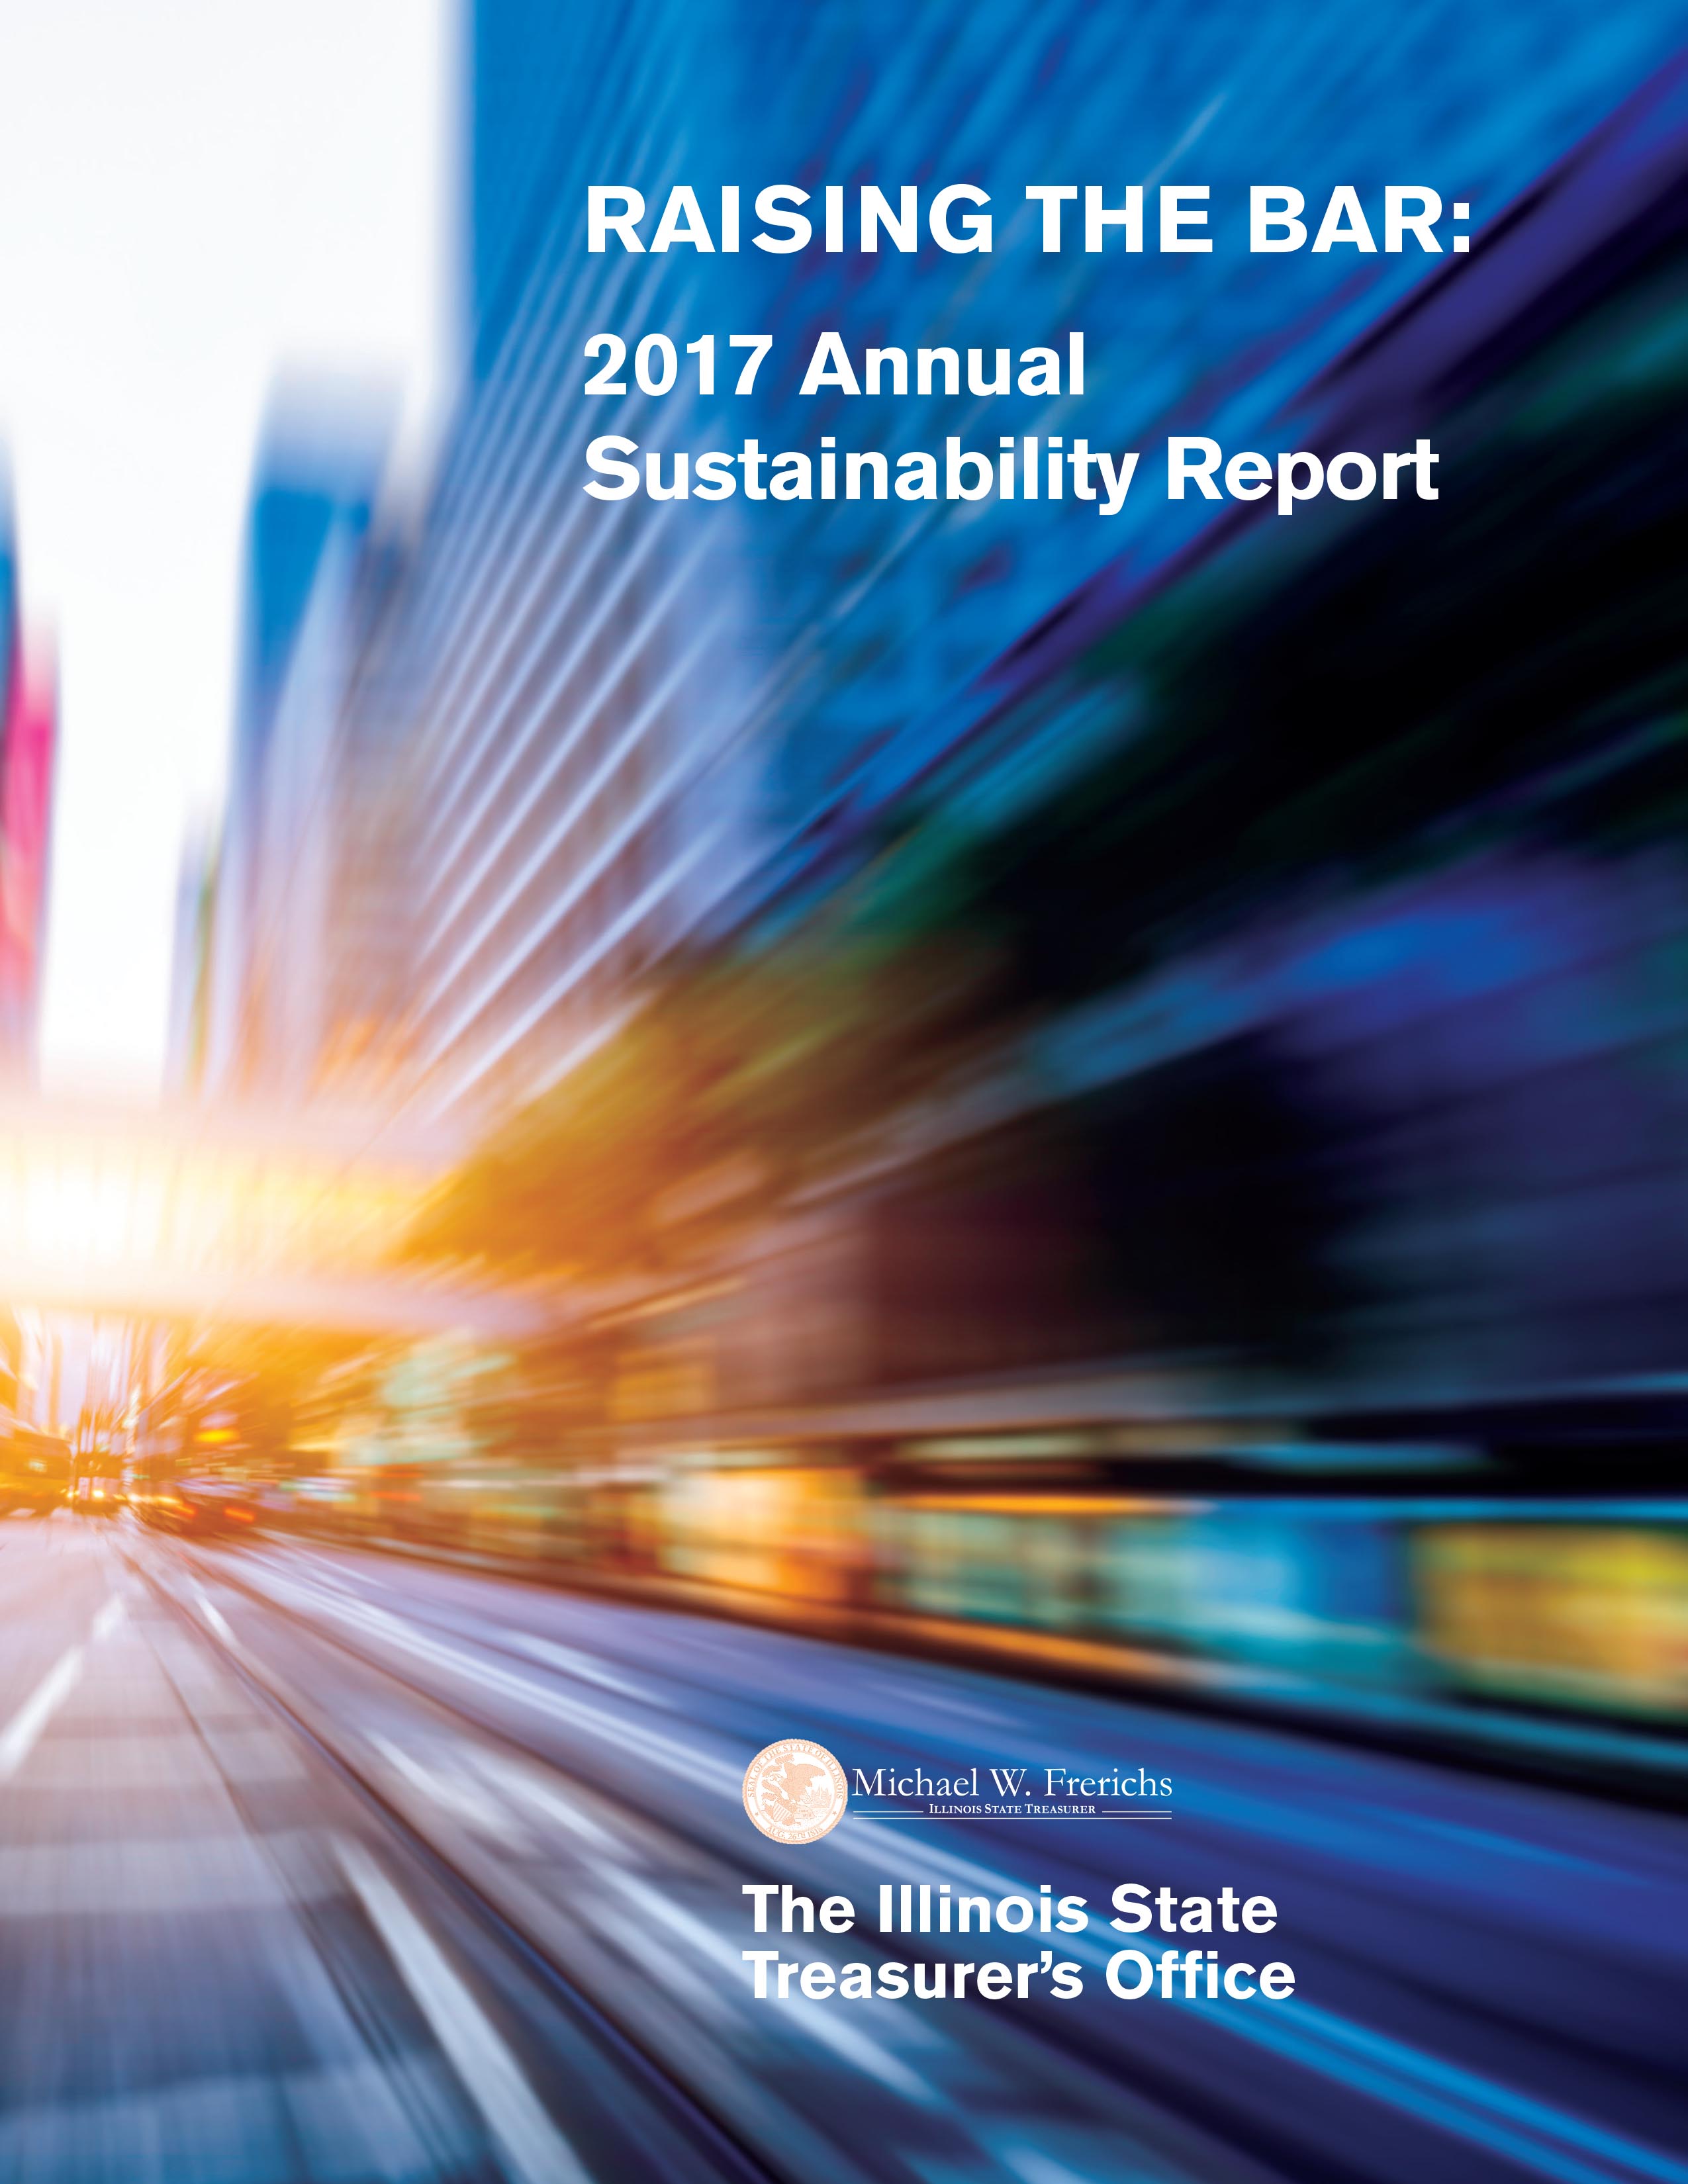 2017 Annual Sustainability Report